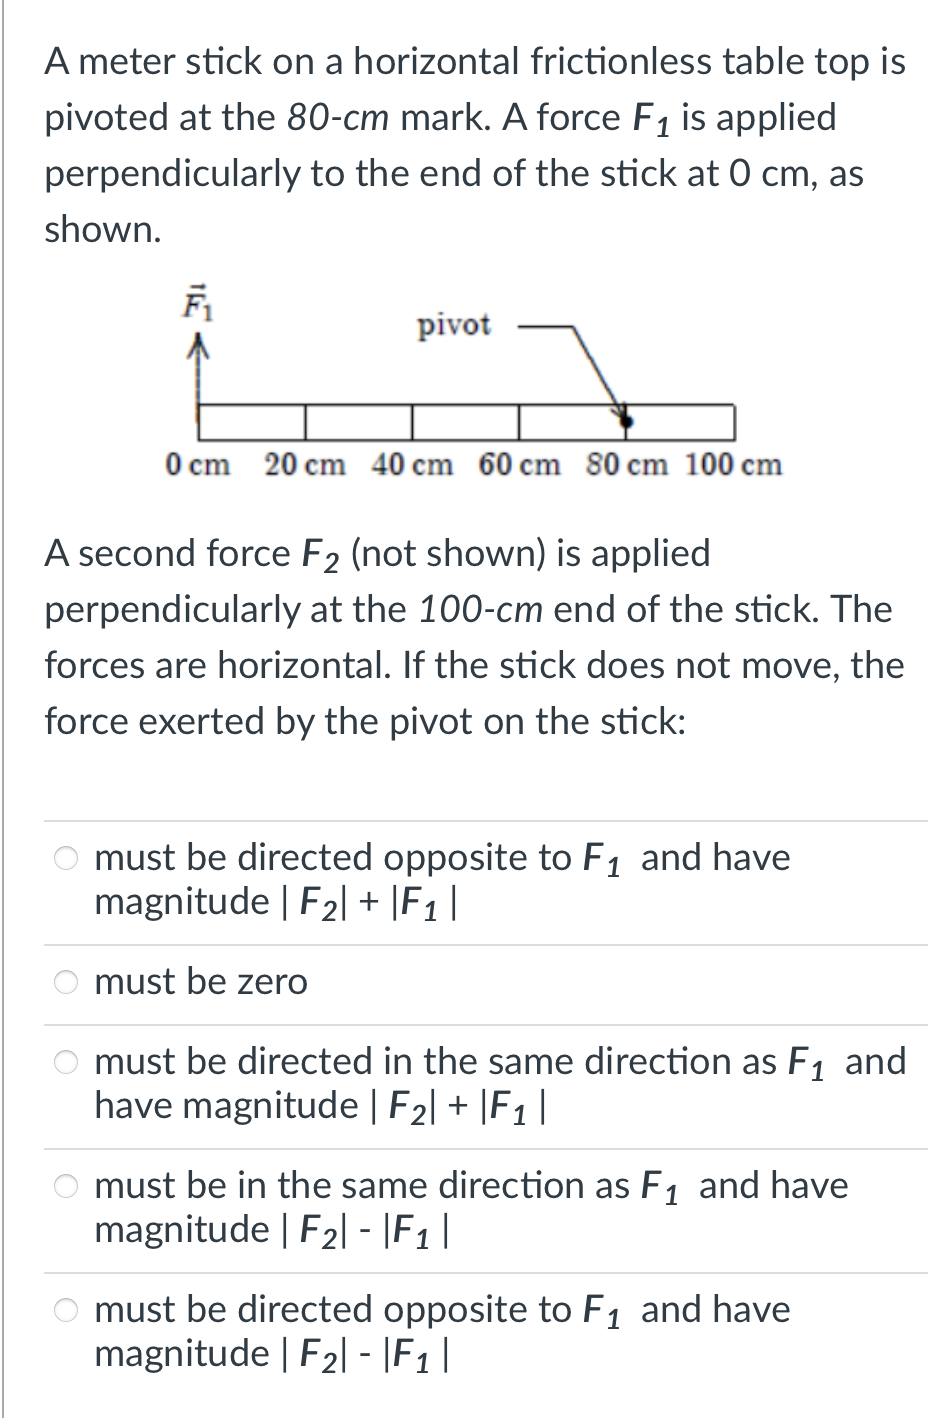 A meter stick on a horizontal frictionless table top is
pivoted at the 80-cm mark. A force F1 is applied
perpendicularly to the end of the stick at 0 cm, as
shown.
pivot
O cm 20 cm 40 cm 60 cm 80 cm 100 cm
A second force F2 (not shown) is applied
perpendicularly at the 100-cm end of the stick. The
forces are horizontal. If the stick does not move, the
force exerted by the pivot on the stick:
O must be directed opposite to F1 and have
magnitude | F2| + |F1 |
must be zero
must be directed in the same direction as F1 and
have magnitude | F2| + |F1 |
must be in the same direction as F1 and have
magnitude | F2| - |F |
must be directed opposite to F, and have
magnitude | F2| - |F1|
